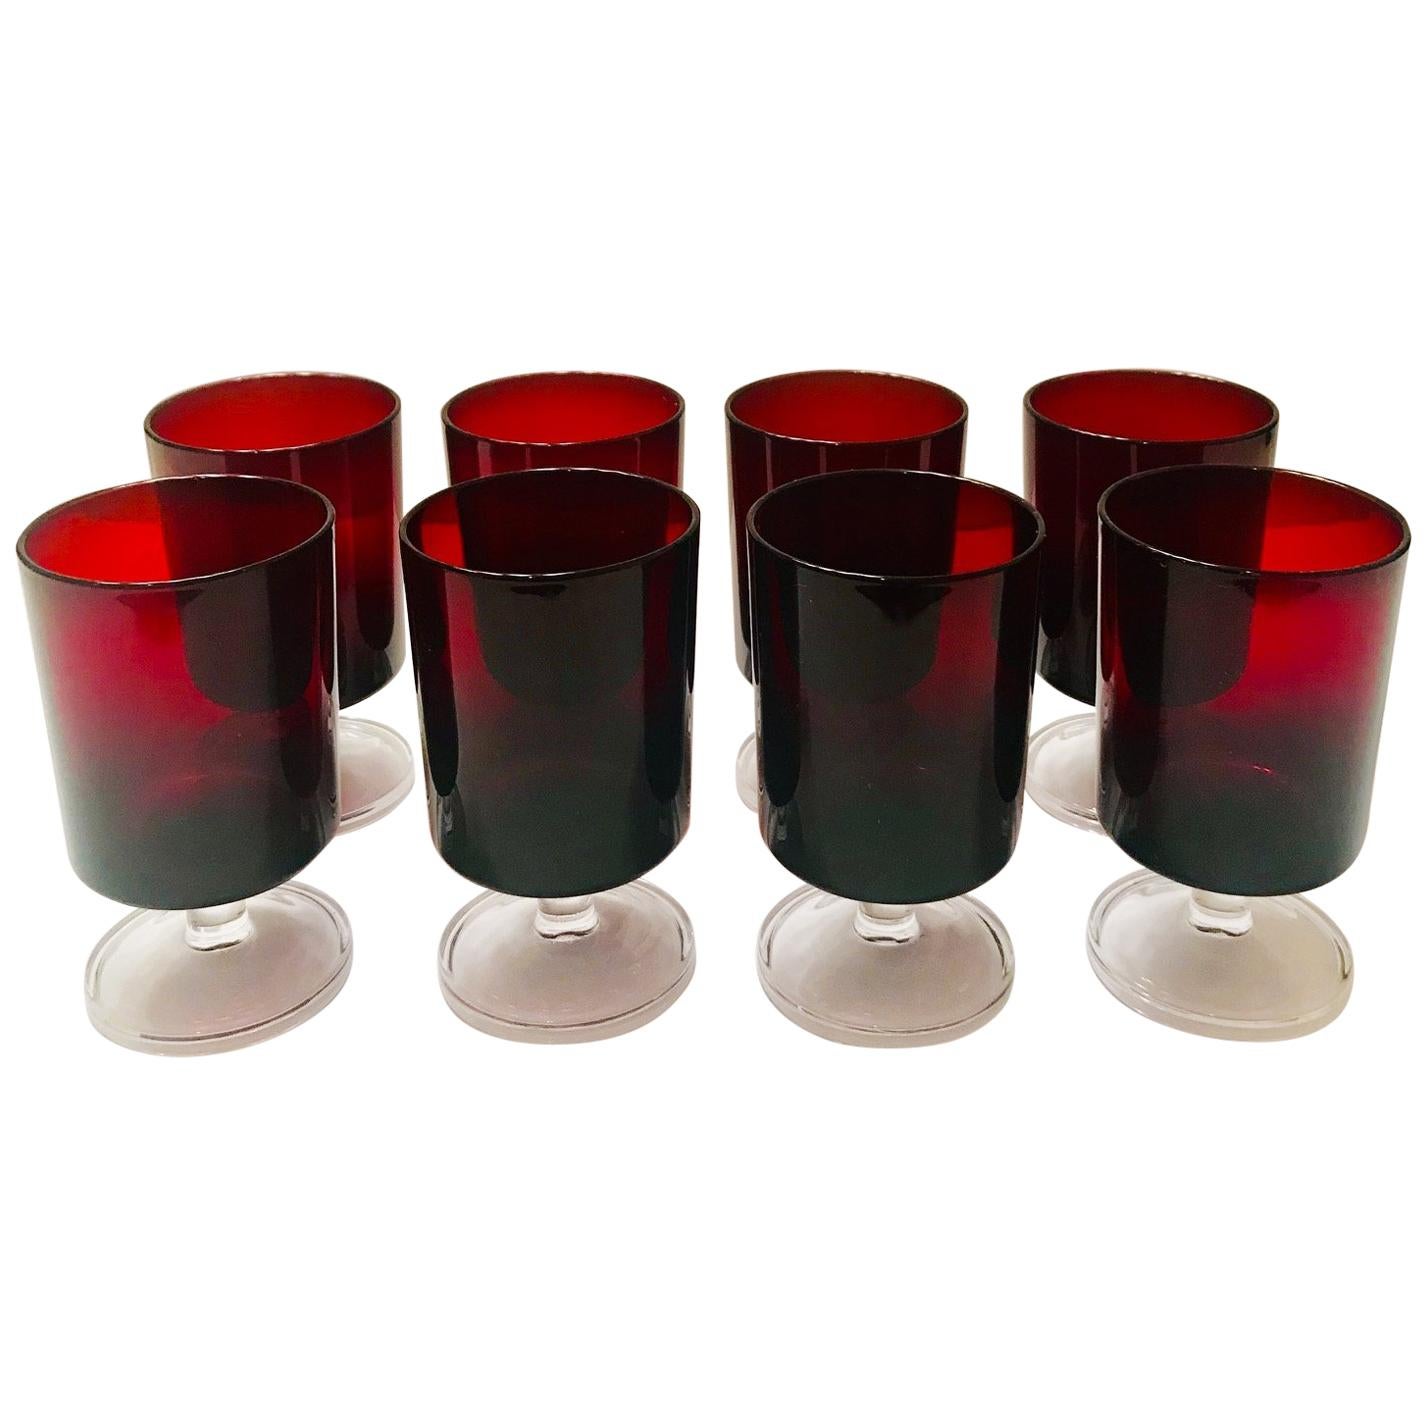 Set of 12 French vintage crystal wine or liquor glasses in jewel tone red with clear glass stems. Glasses have Minimalist design with cylinder forms. Stamped 